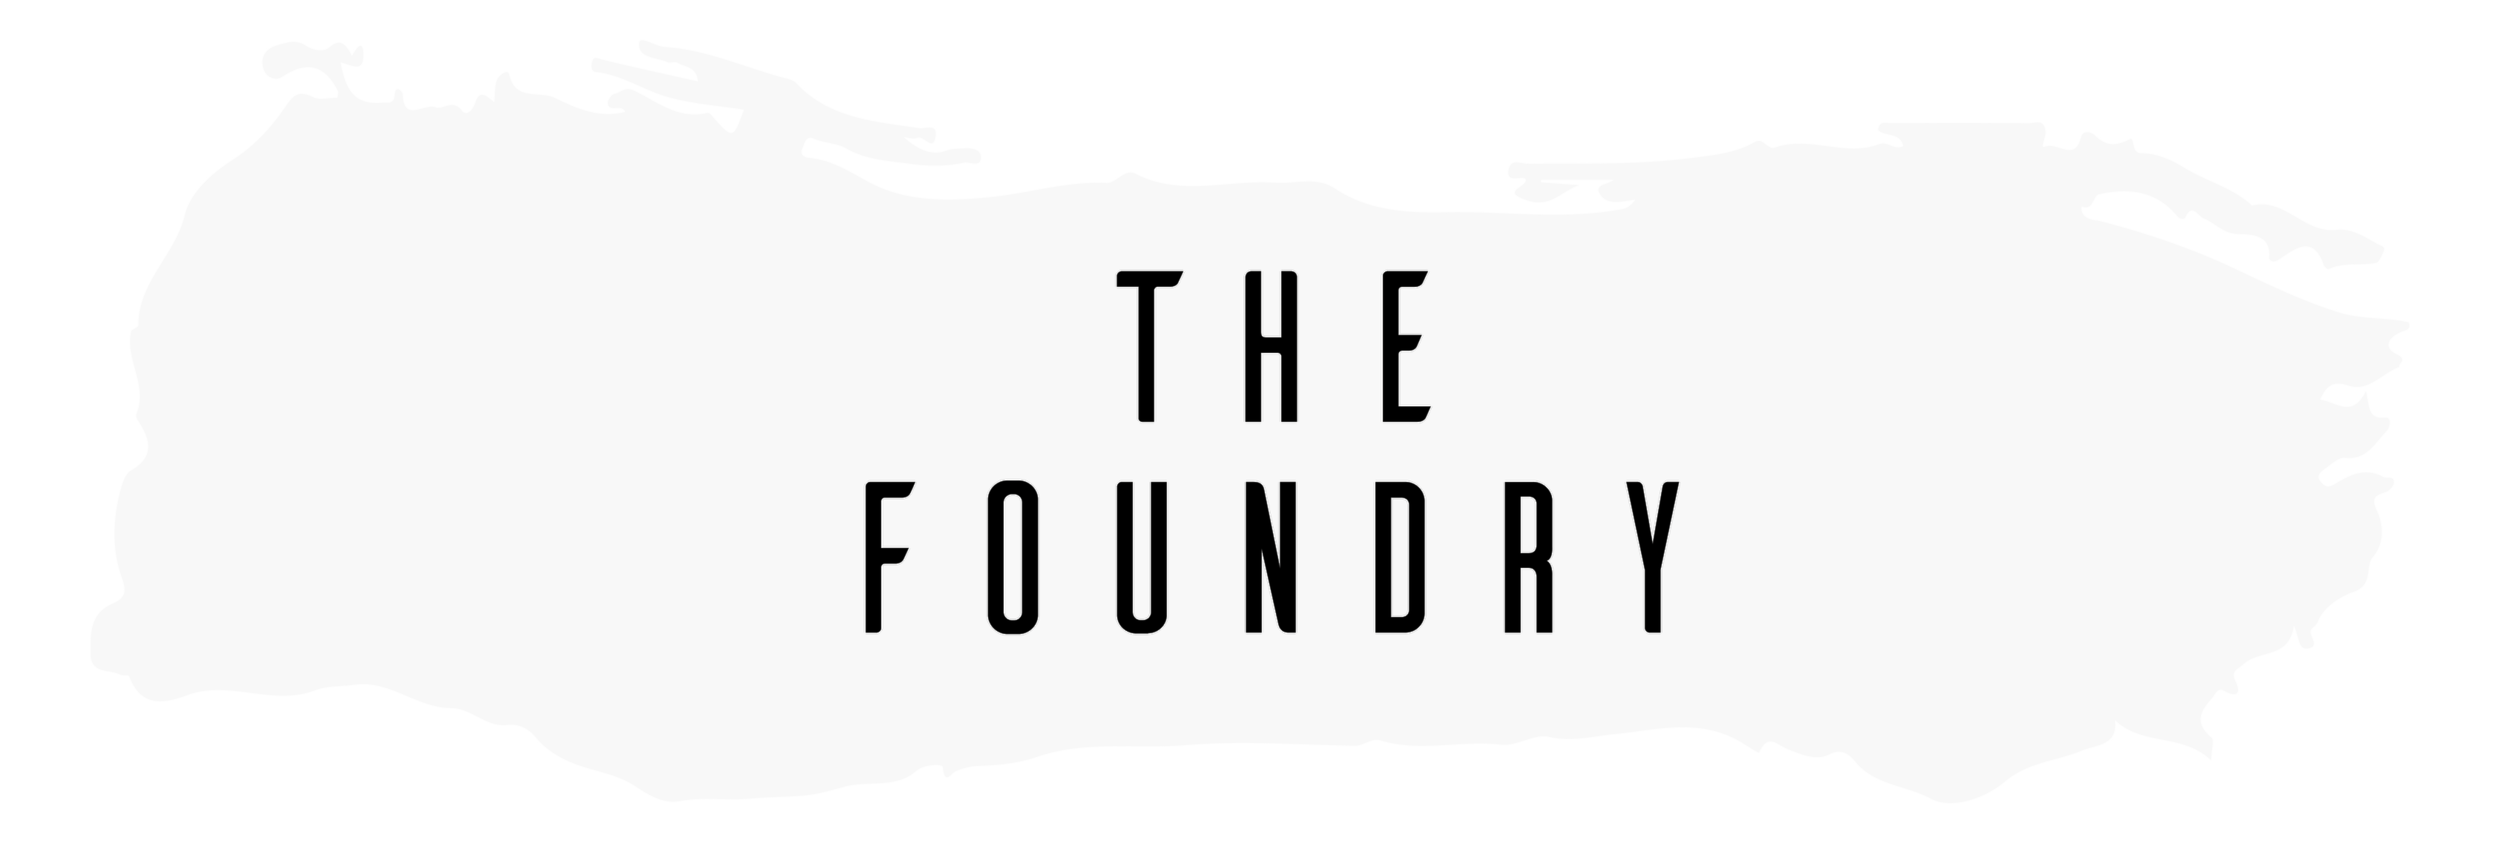 The_Foundry